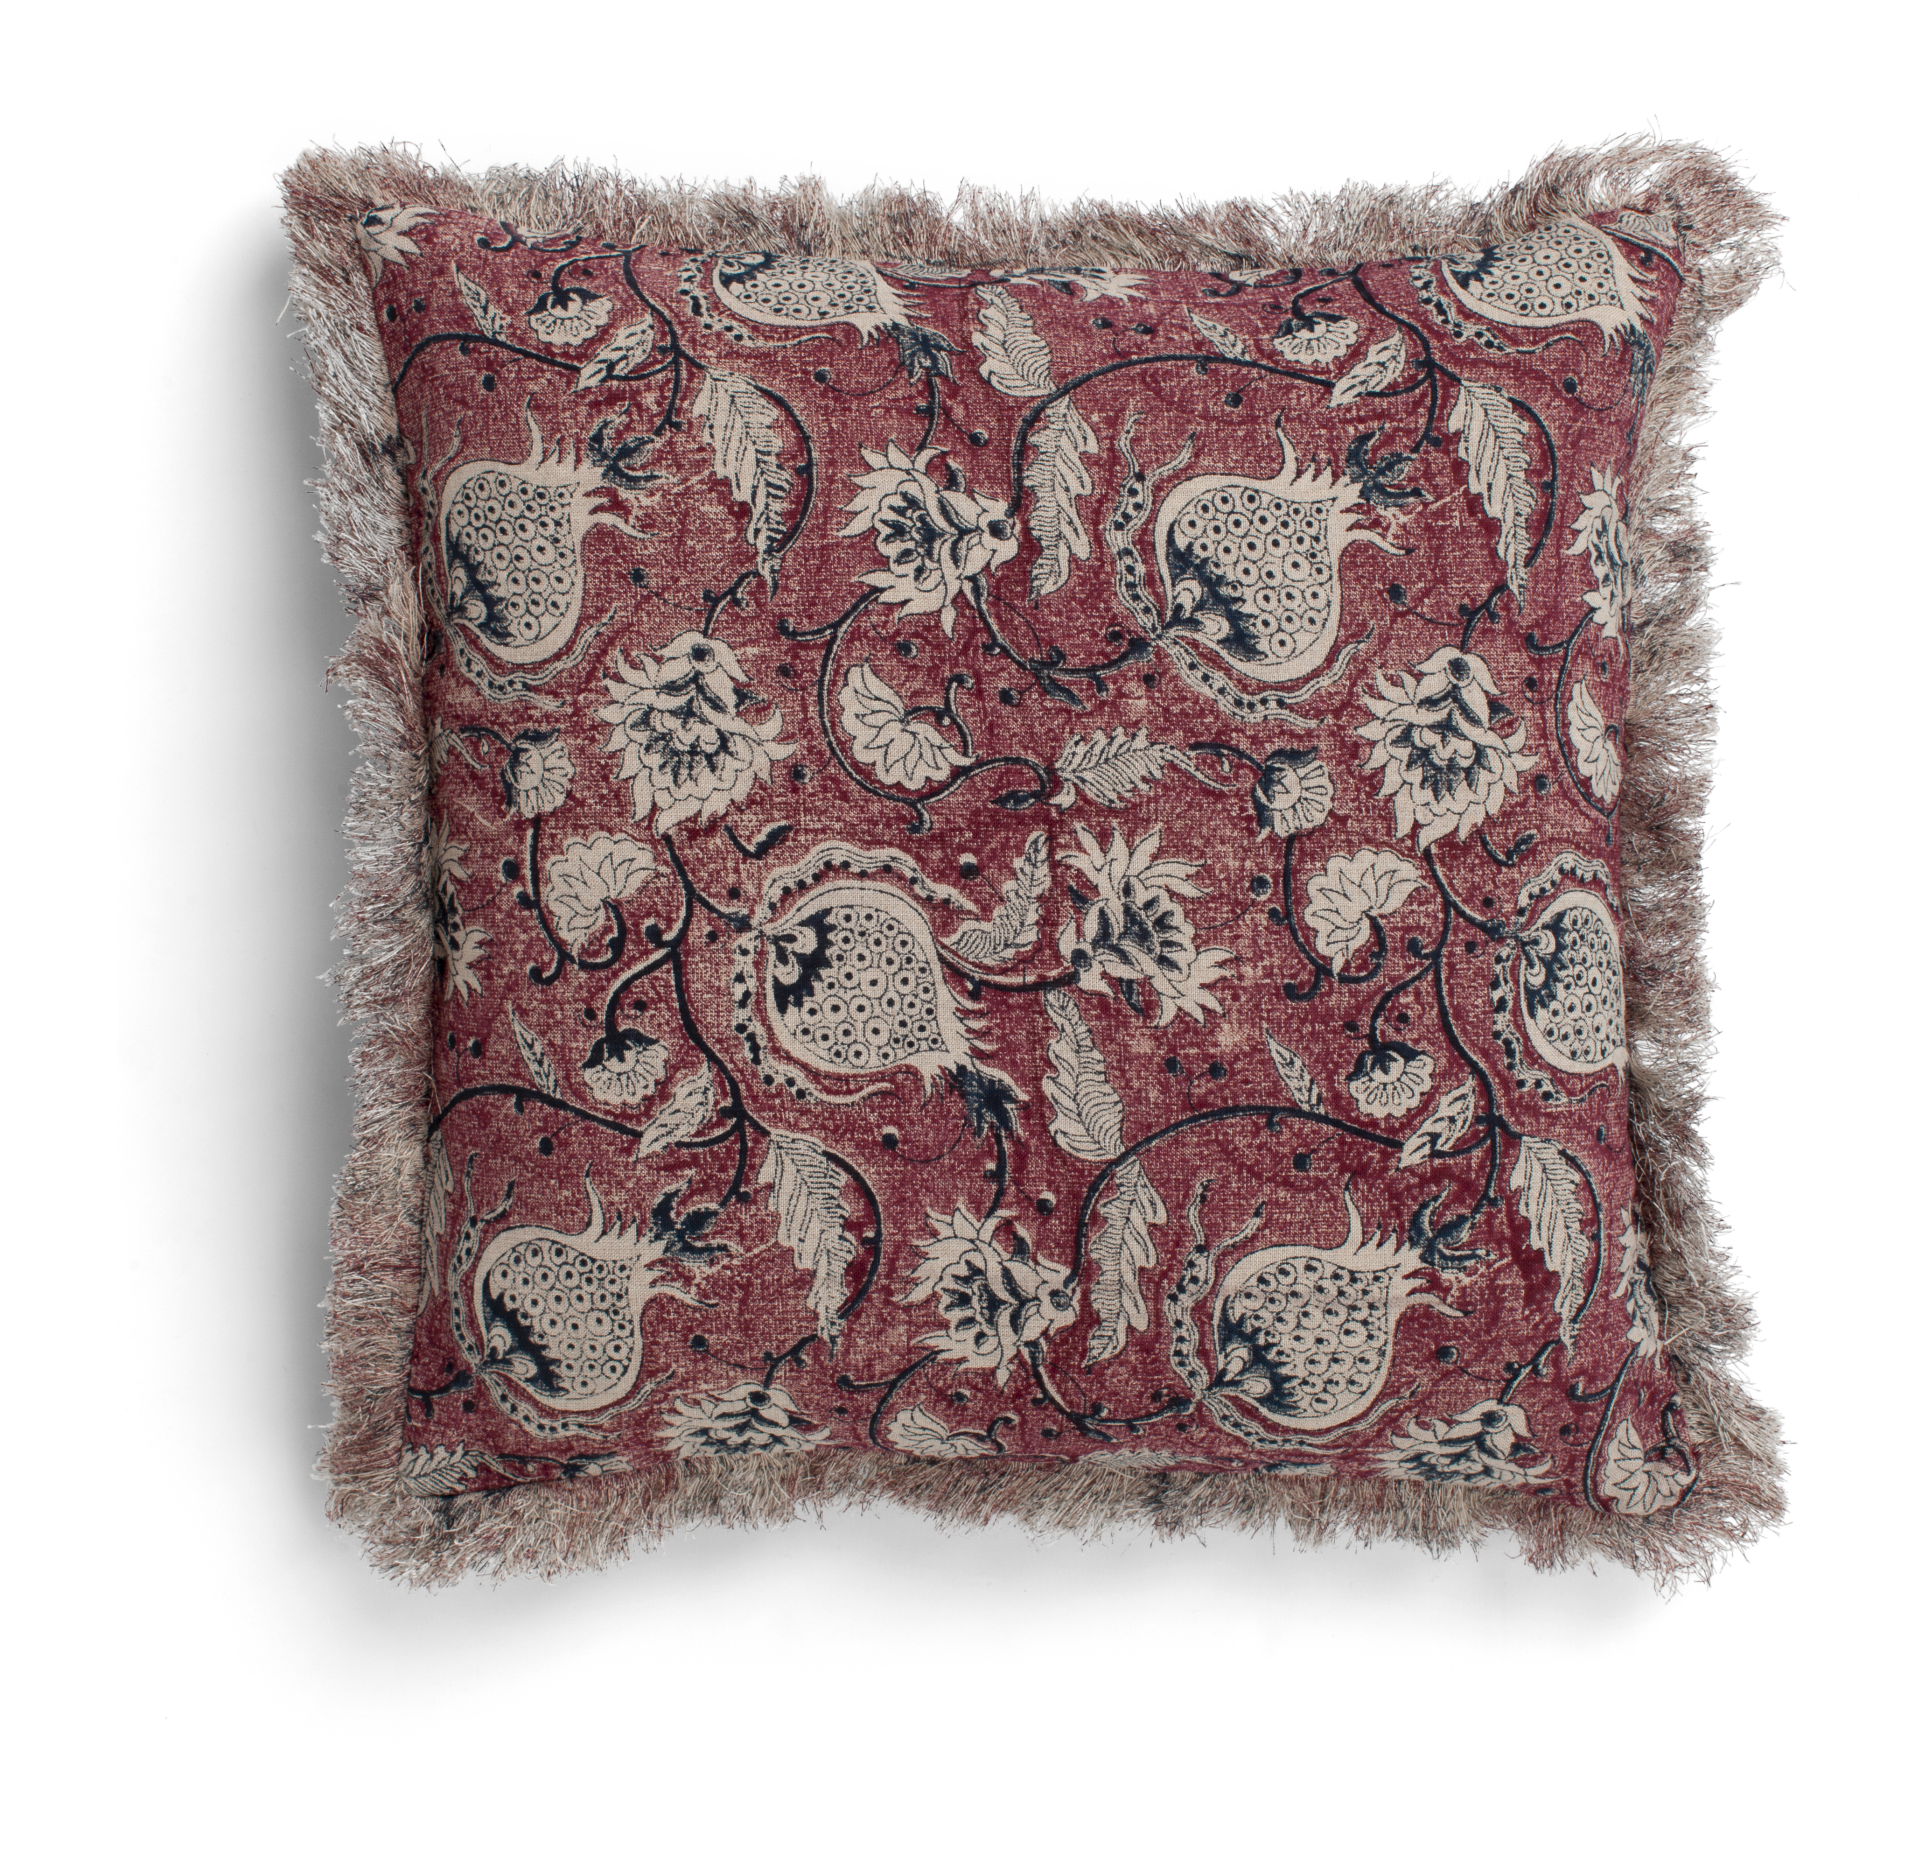 Linen cushion with Pomegranate print in Burgundy